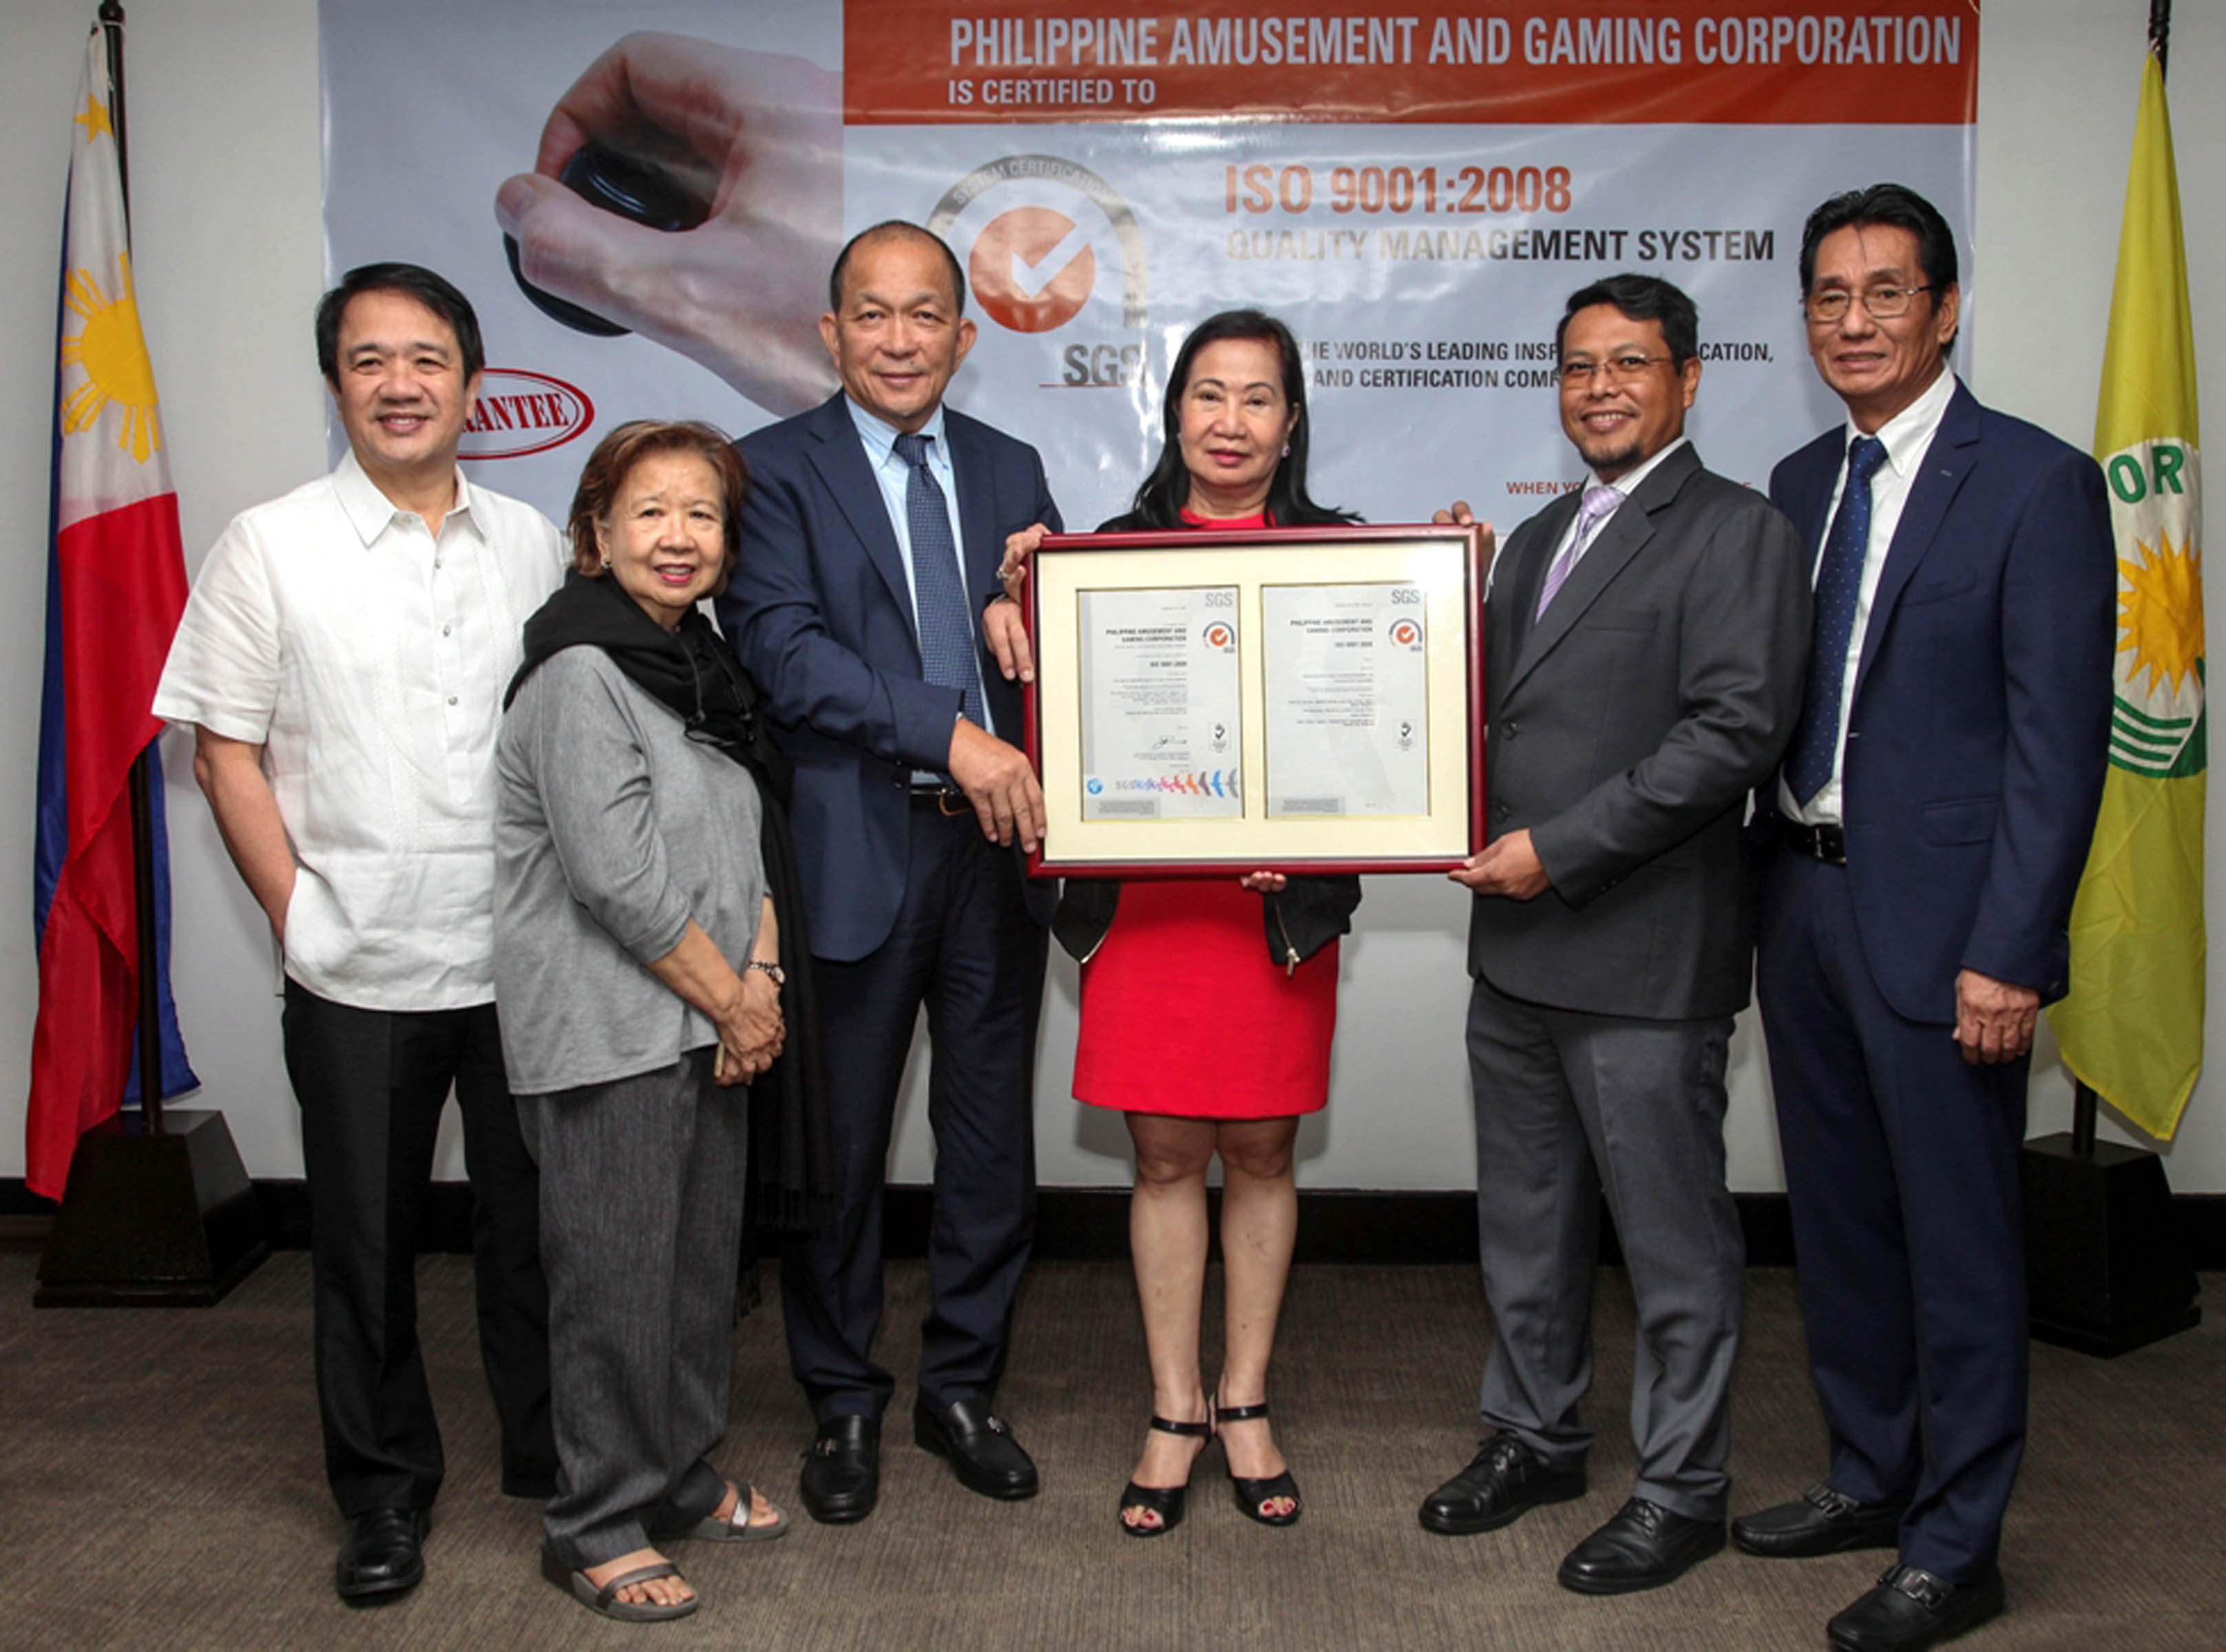 PAGCOR now ISO 9001:2008 certified